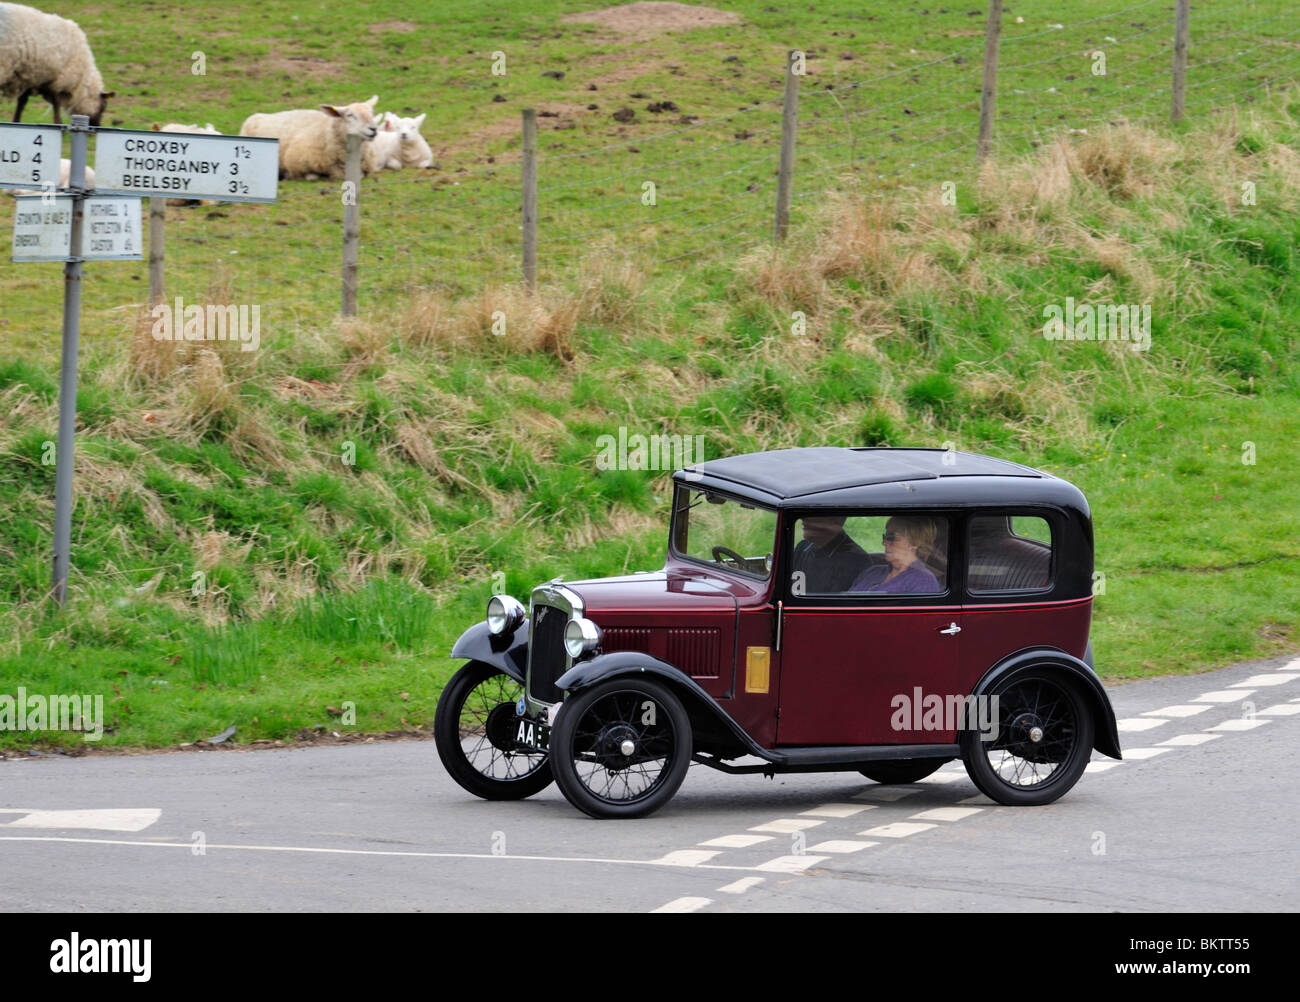 1933 AUSTIN SEVEN RP BOX SALOON. VINTAGE CARS. ON THE OPEN ROAD. Stock Photo